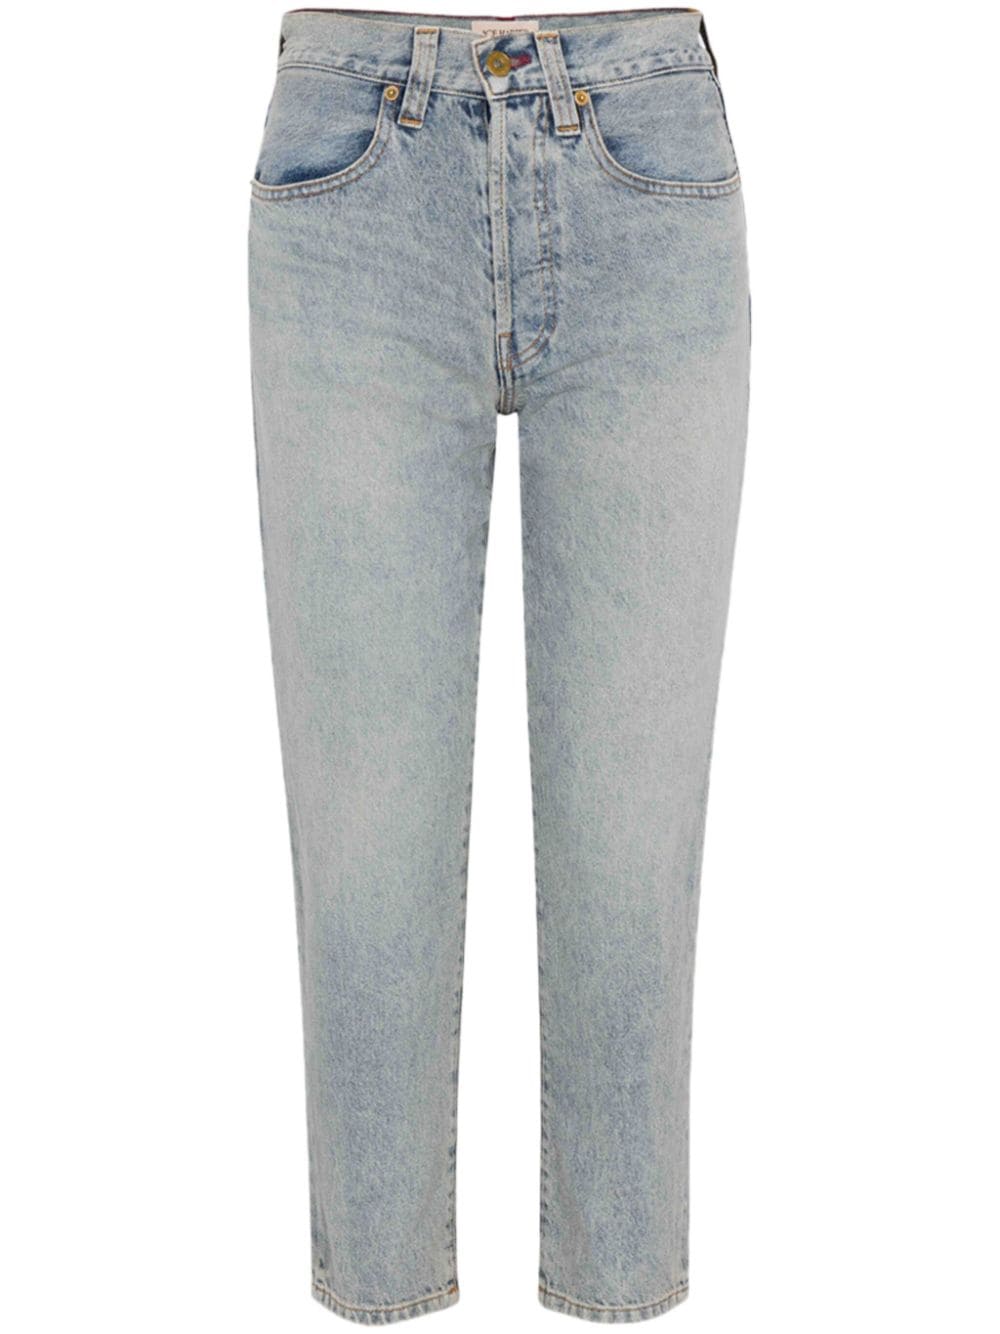 The Iggy cotton cropped jeans